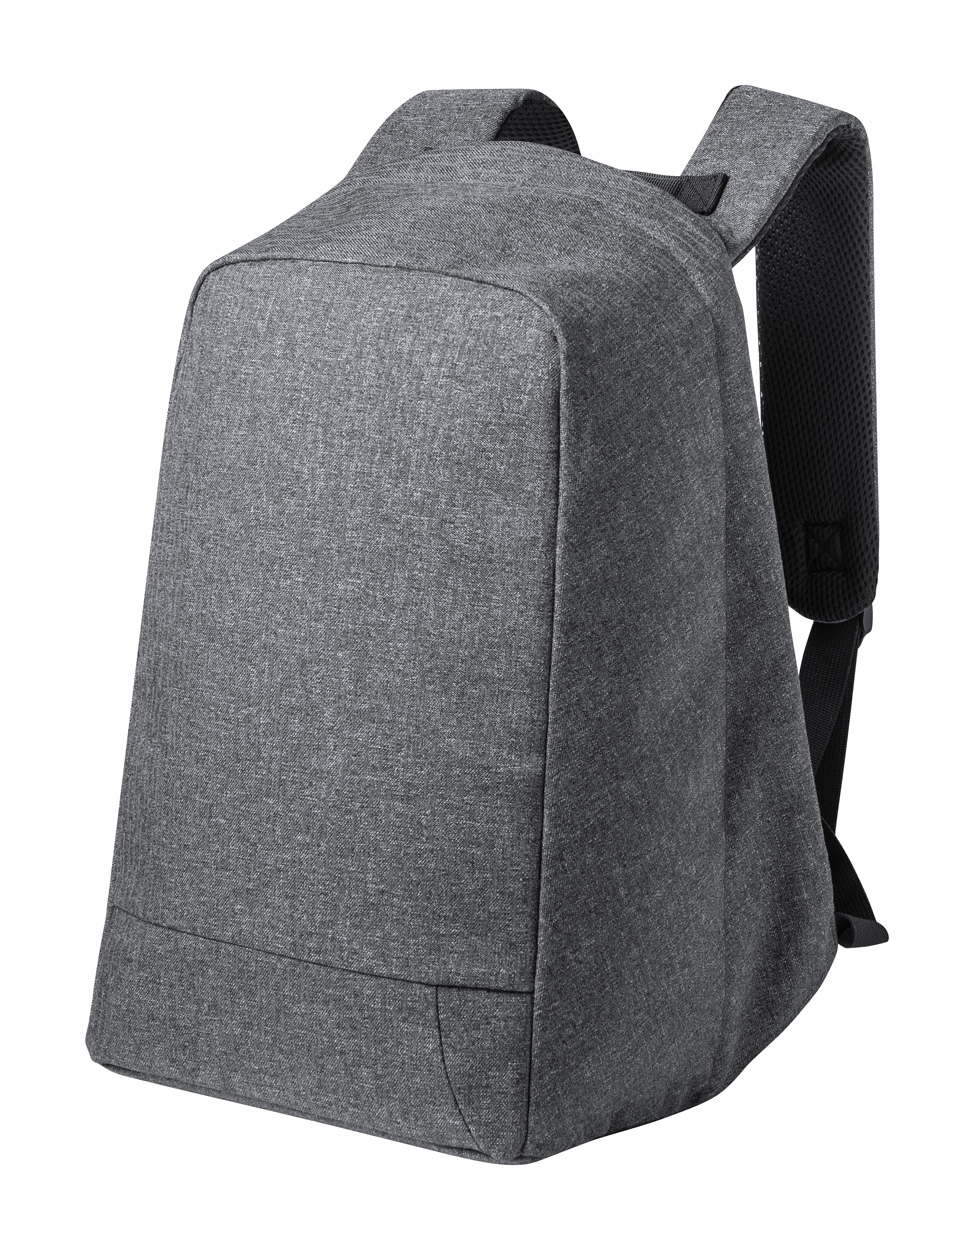 Quasar anti-theft backpack - silver